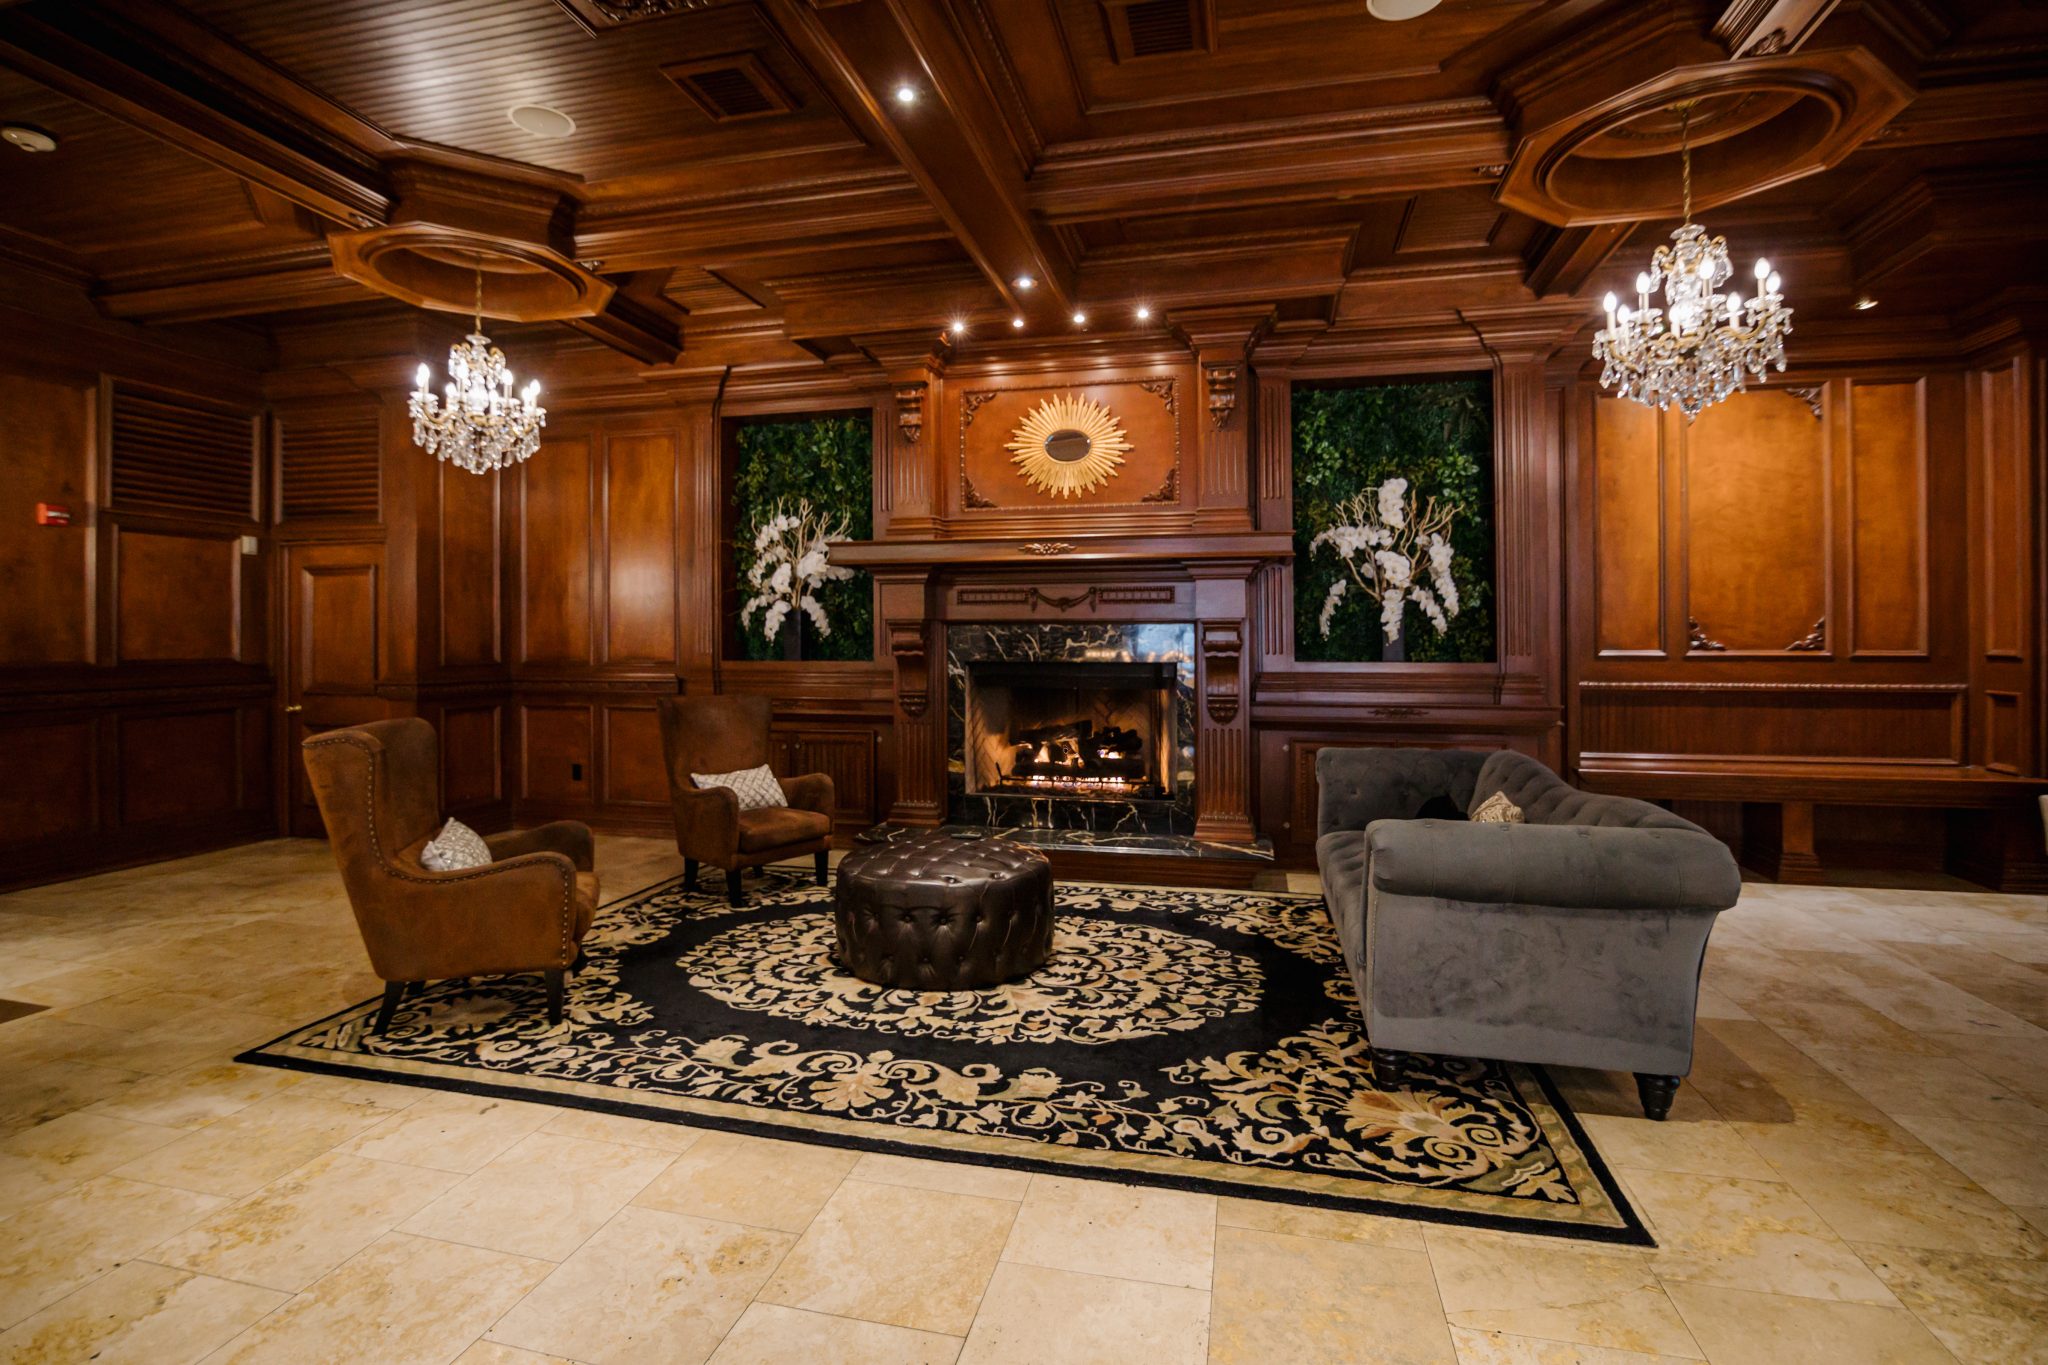 Sweet 16 places in Long Island New York - Enter the Lobby of The Inn at New Hyde Park